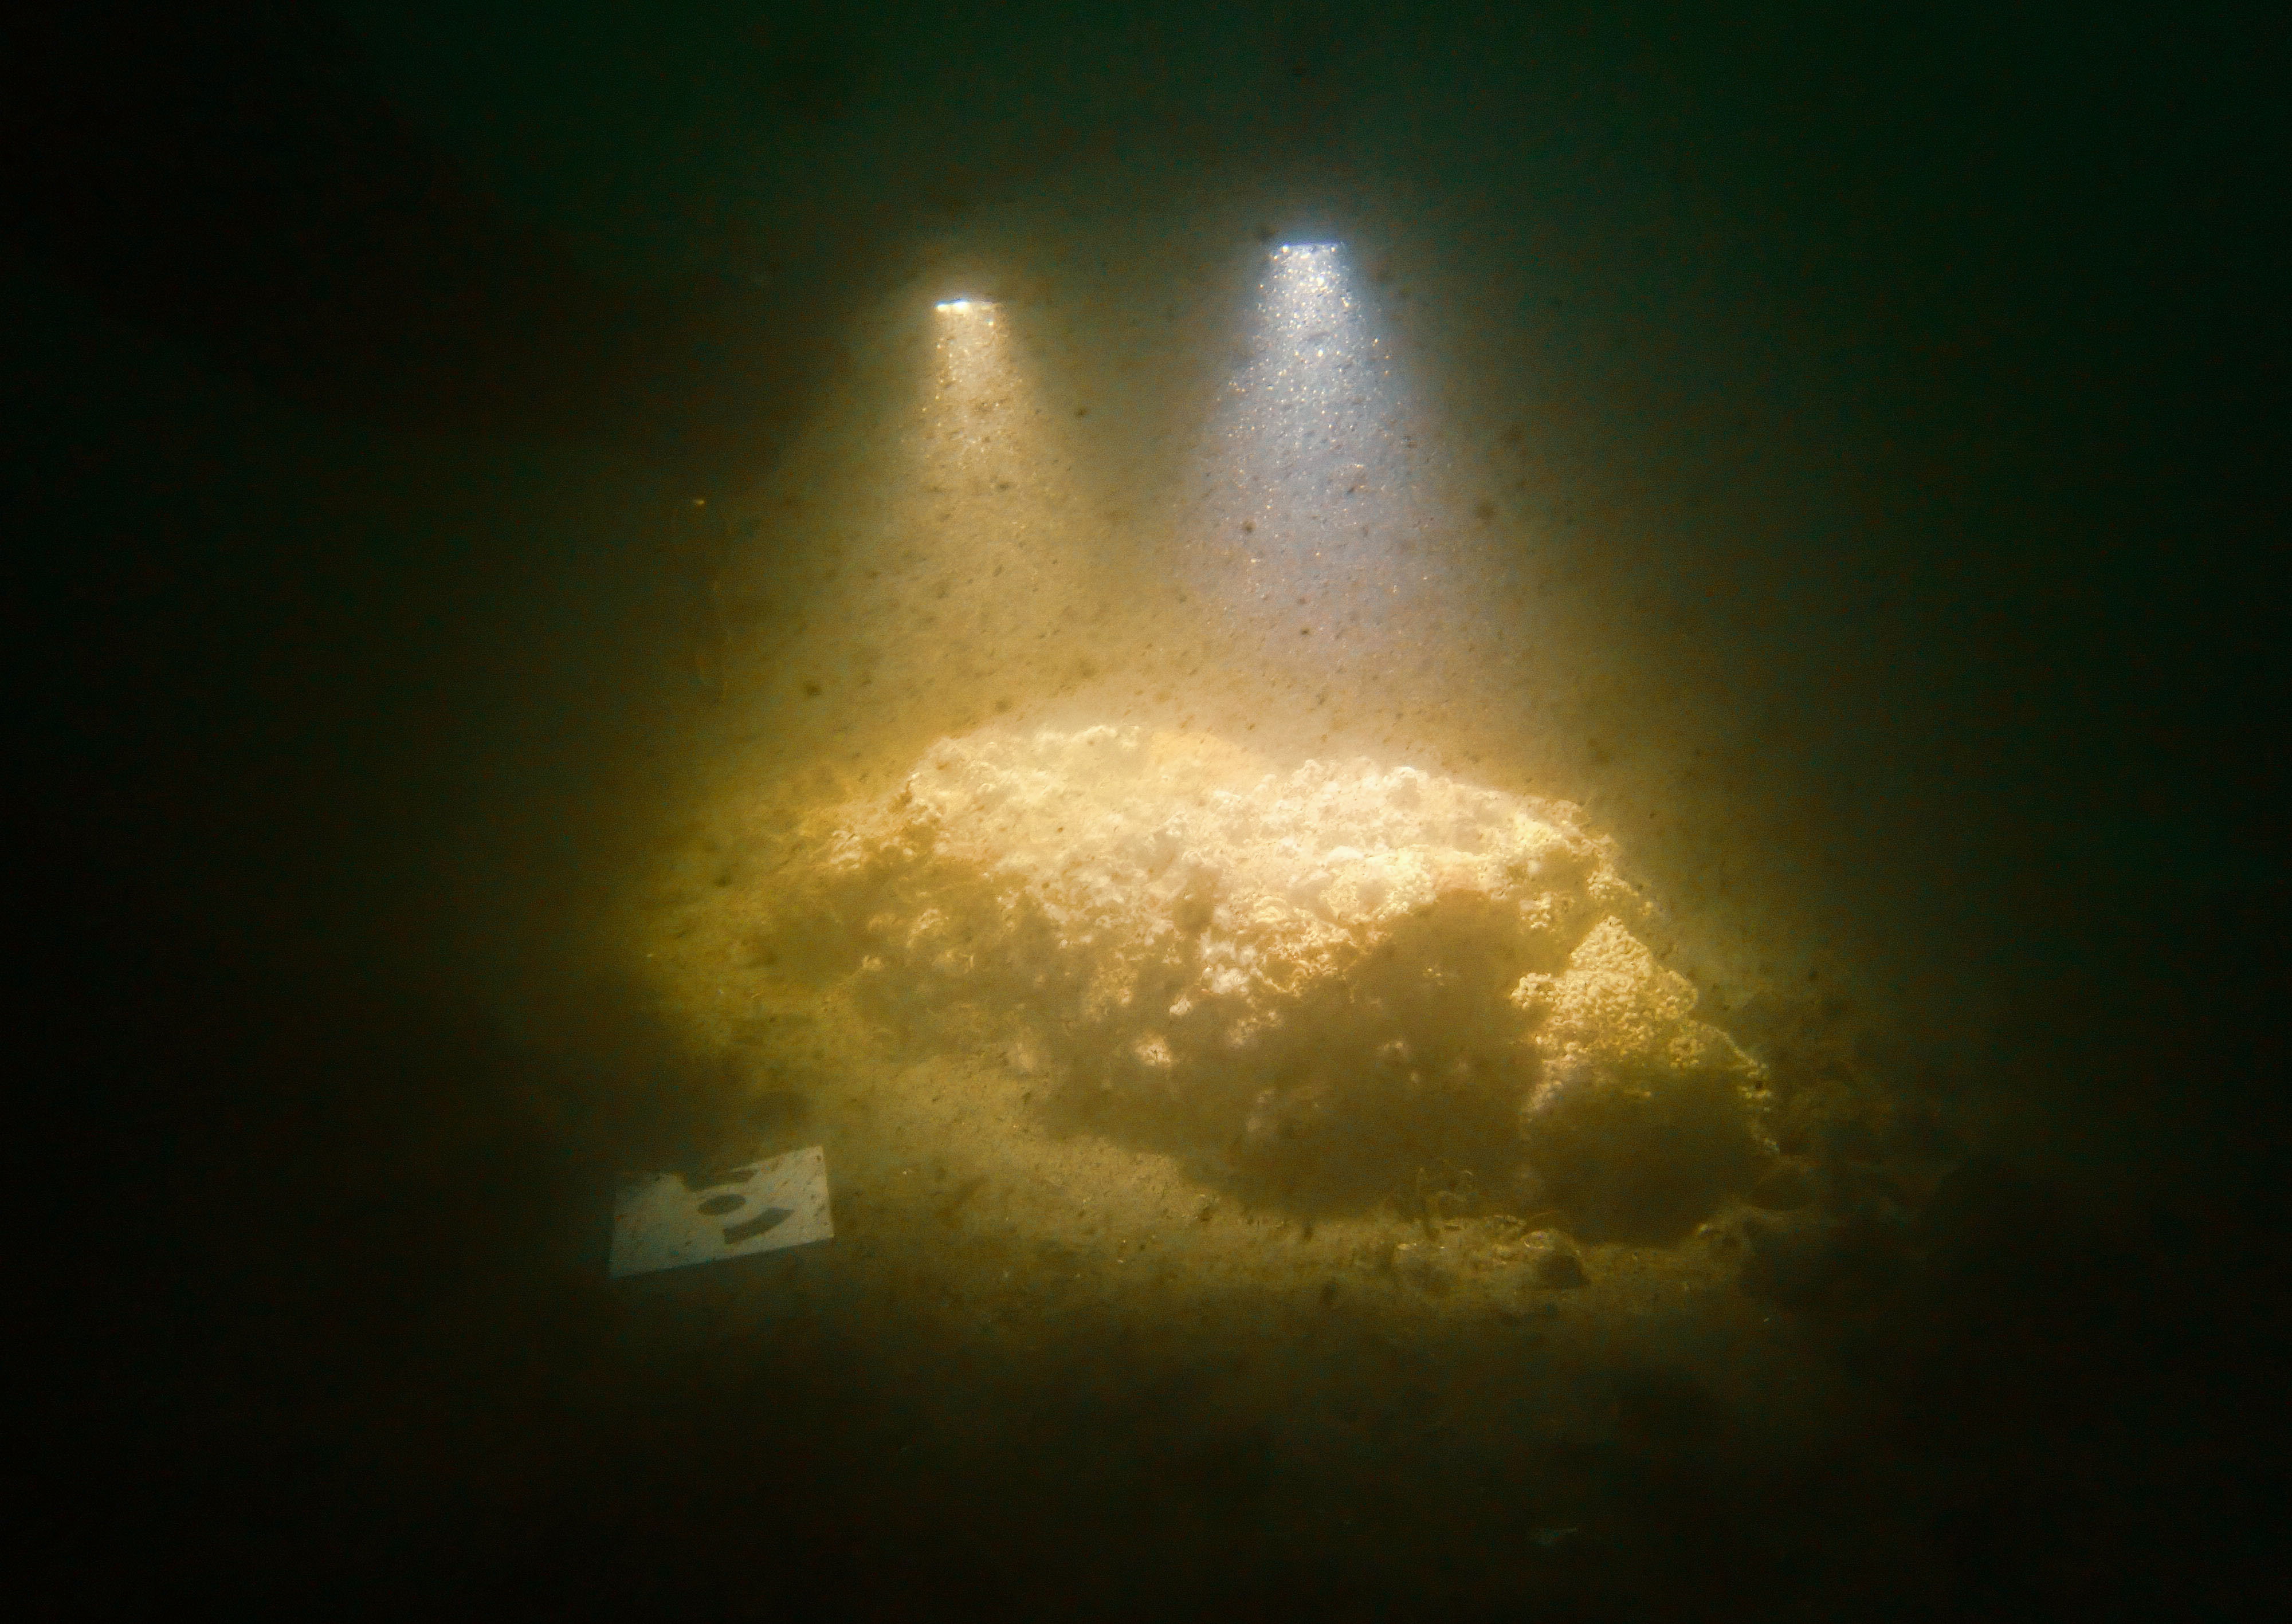 Lights illuminate a portion of the wreck underwater 